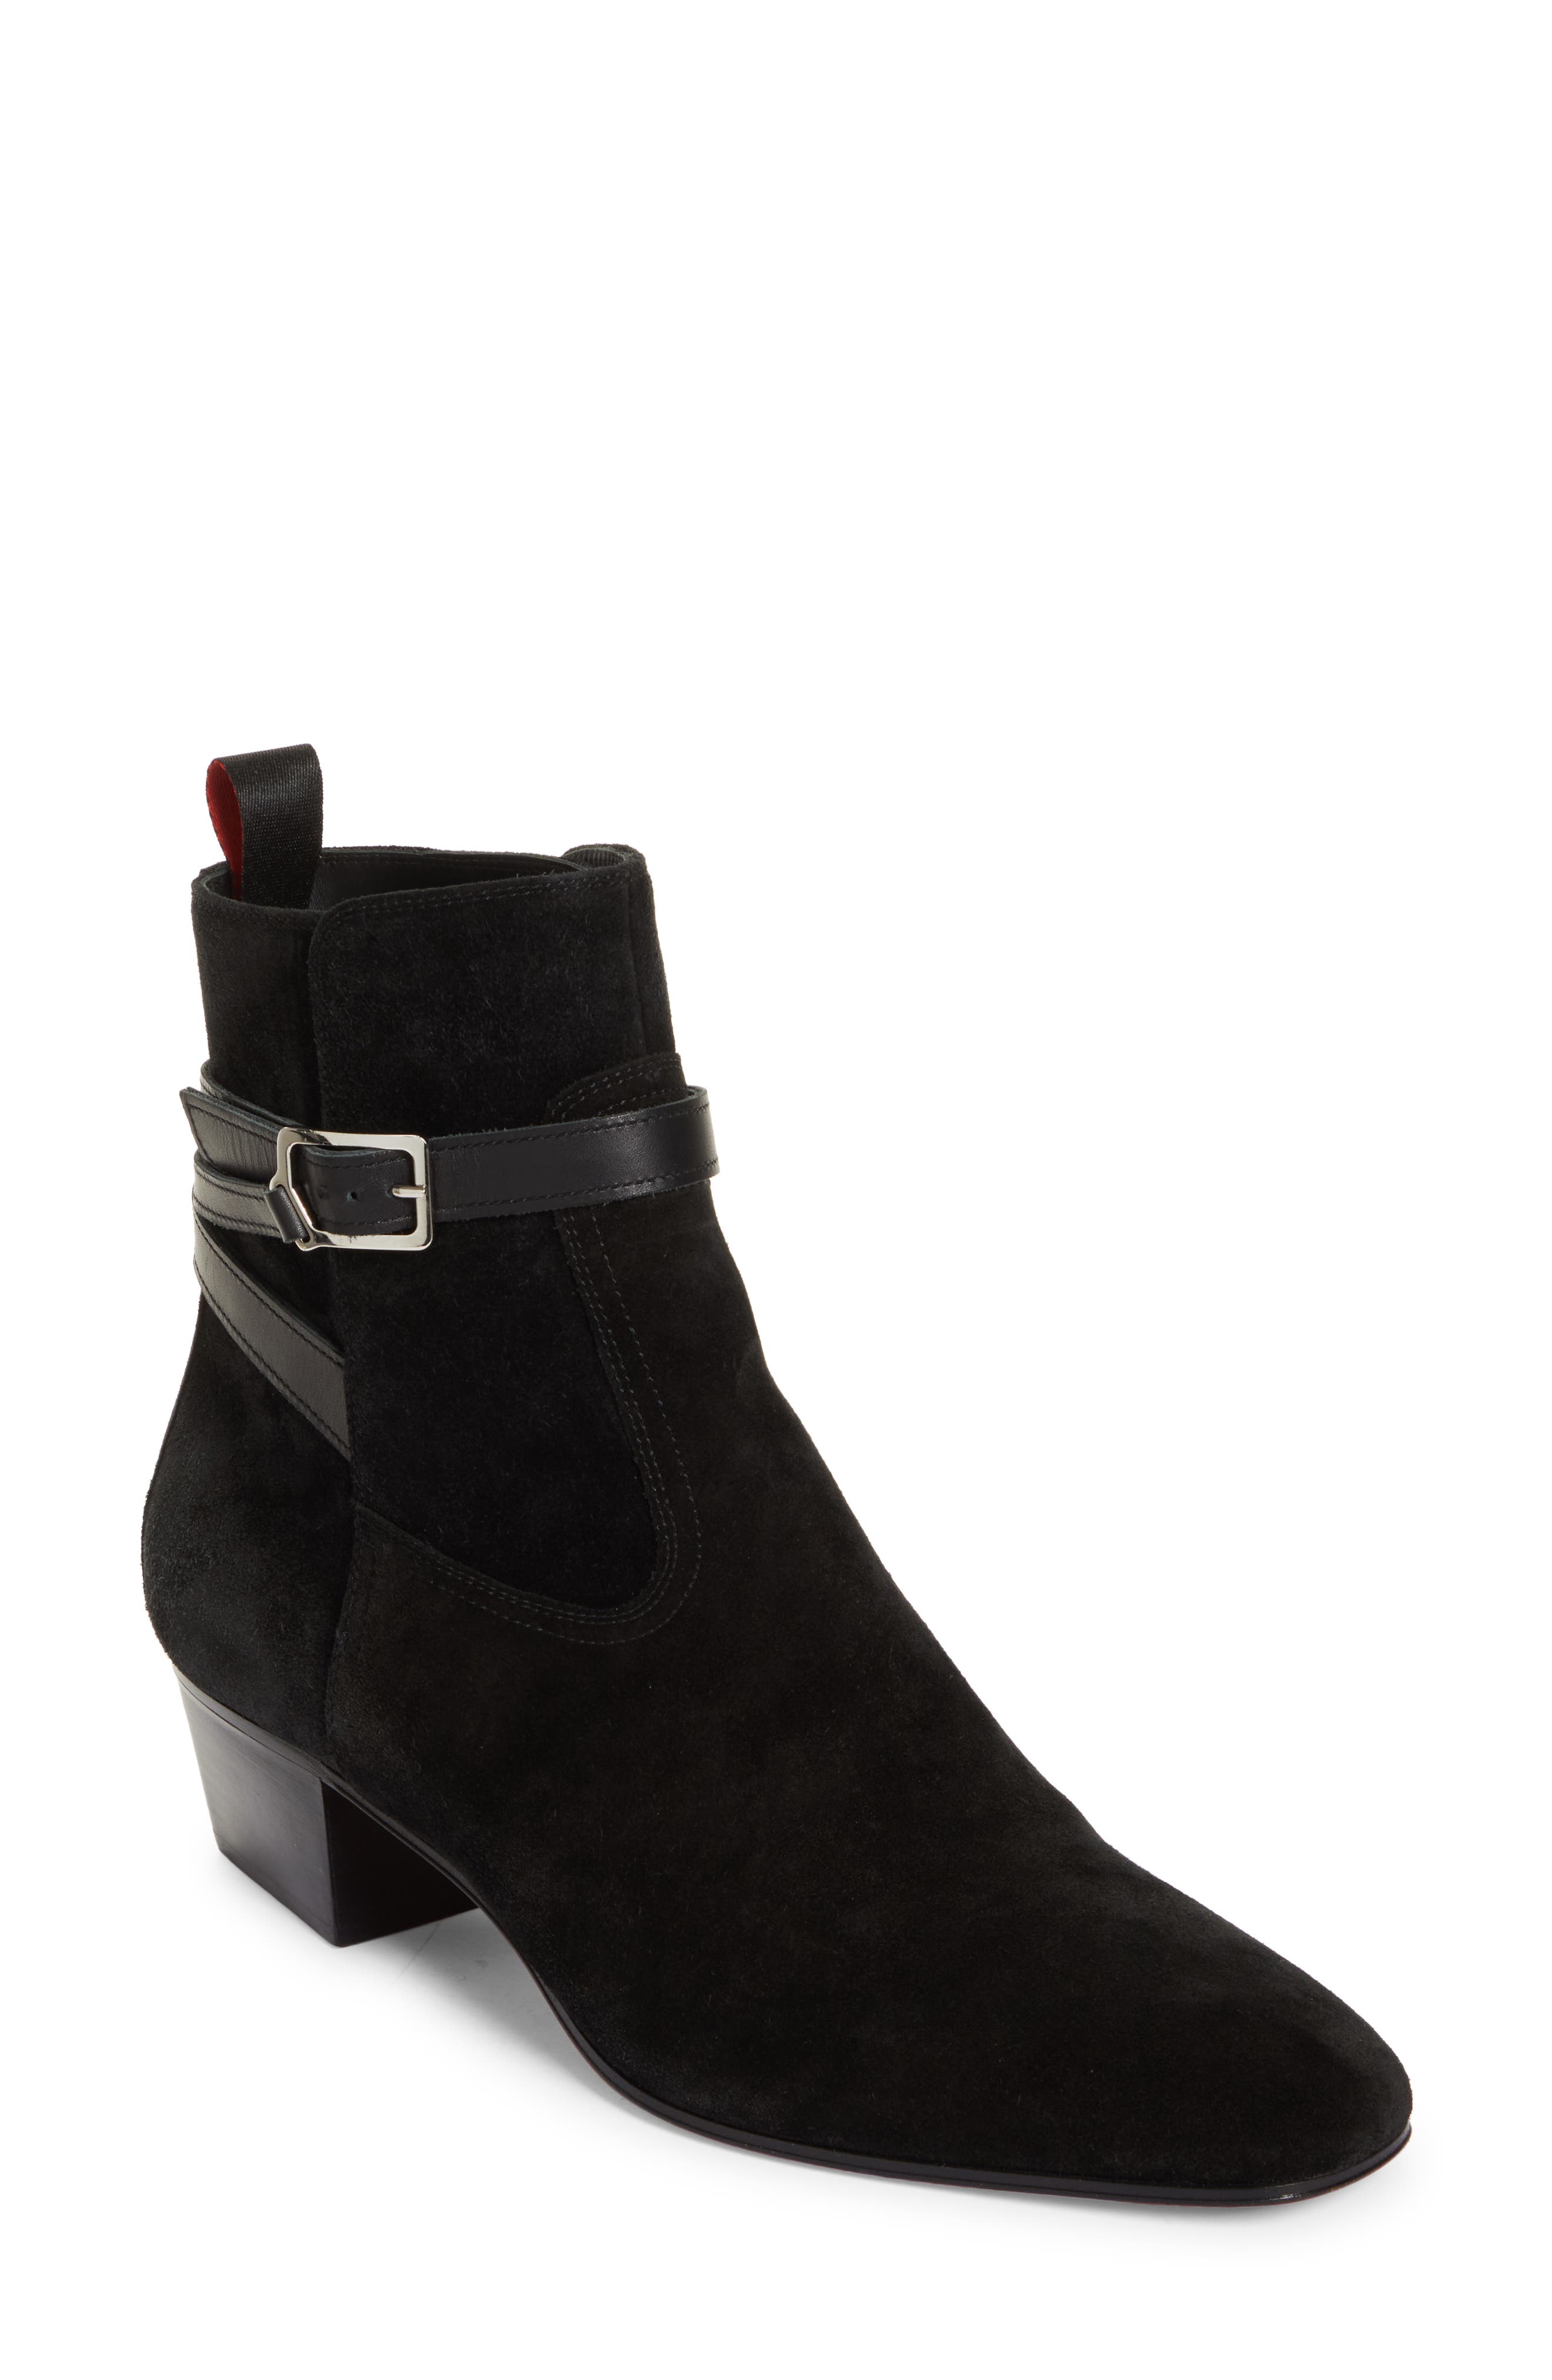 Giuseppe Zanotti New York suede ankle boots - Black